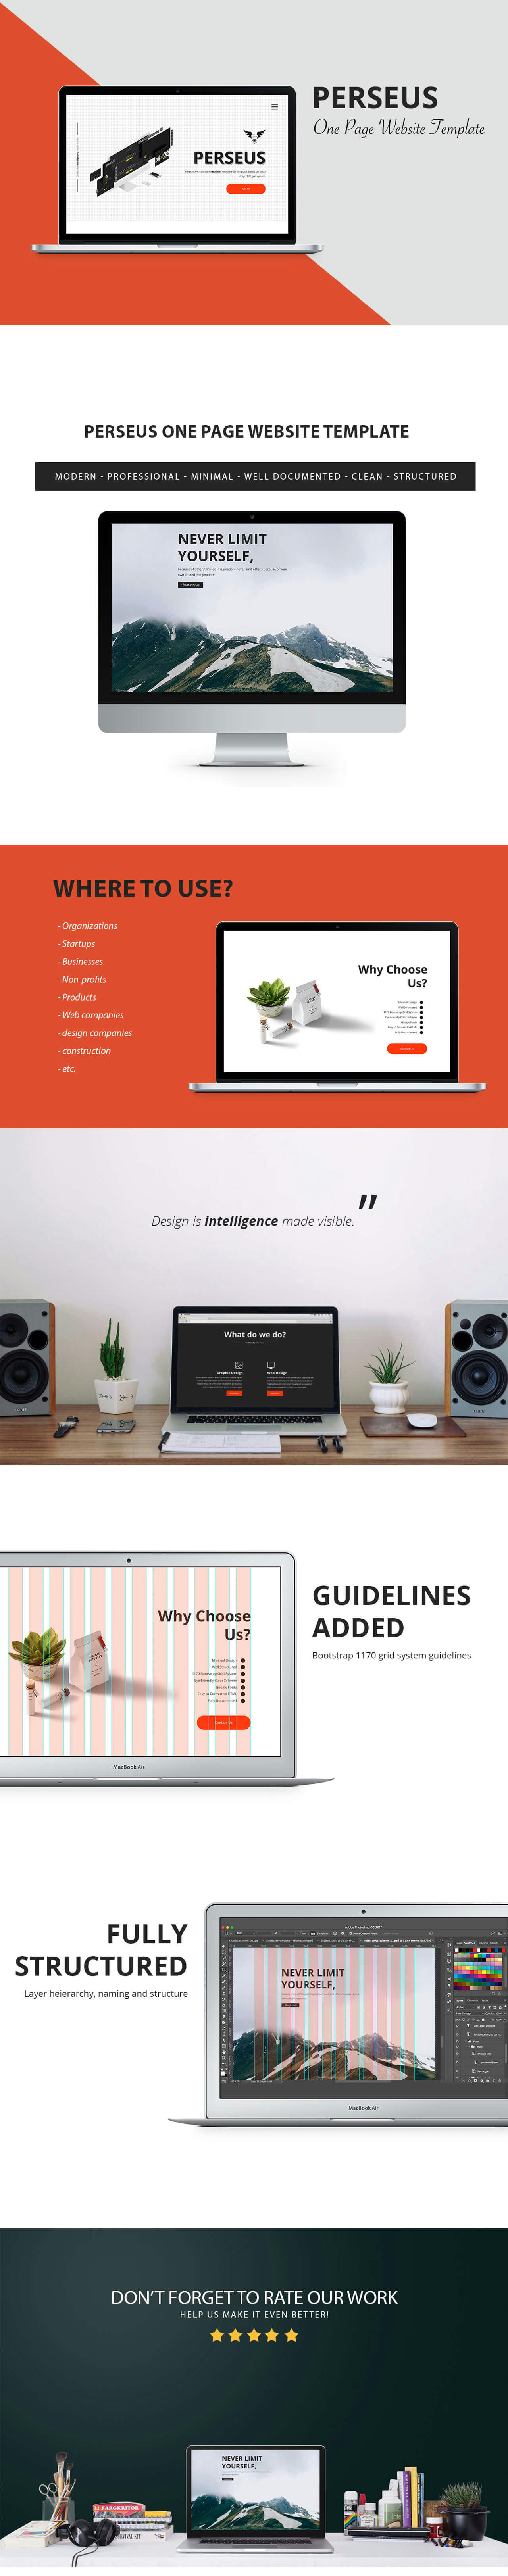 Perseus One Page Website PSD Template - 1